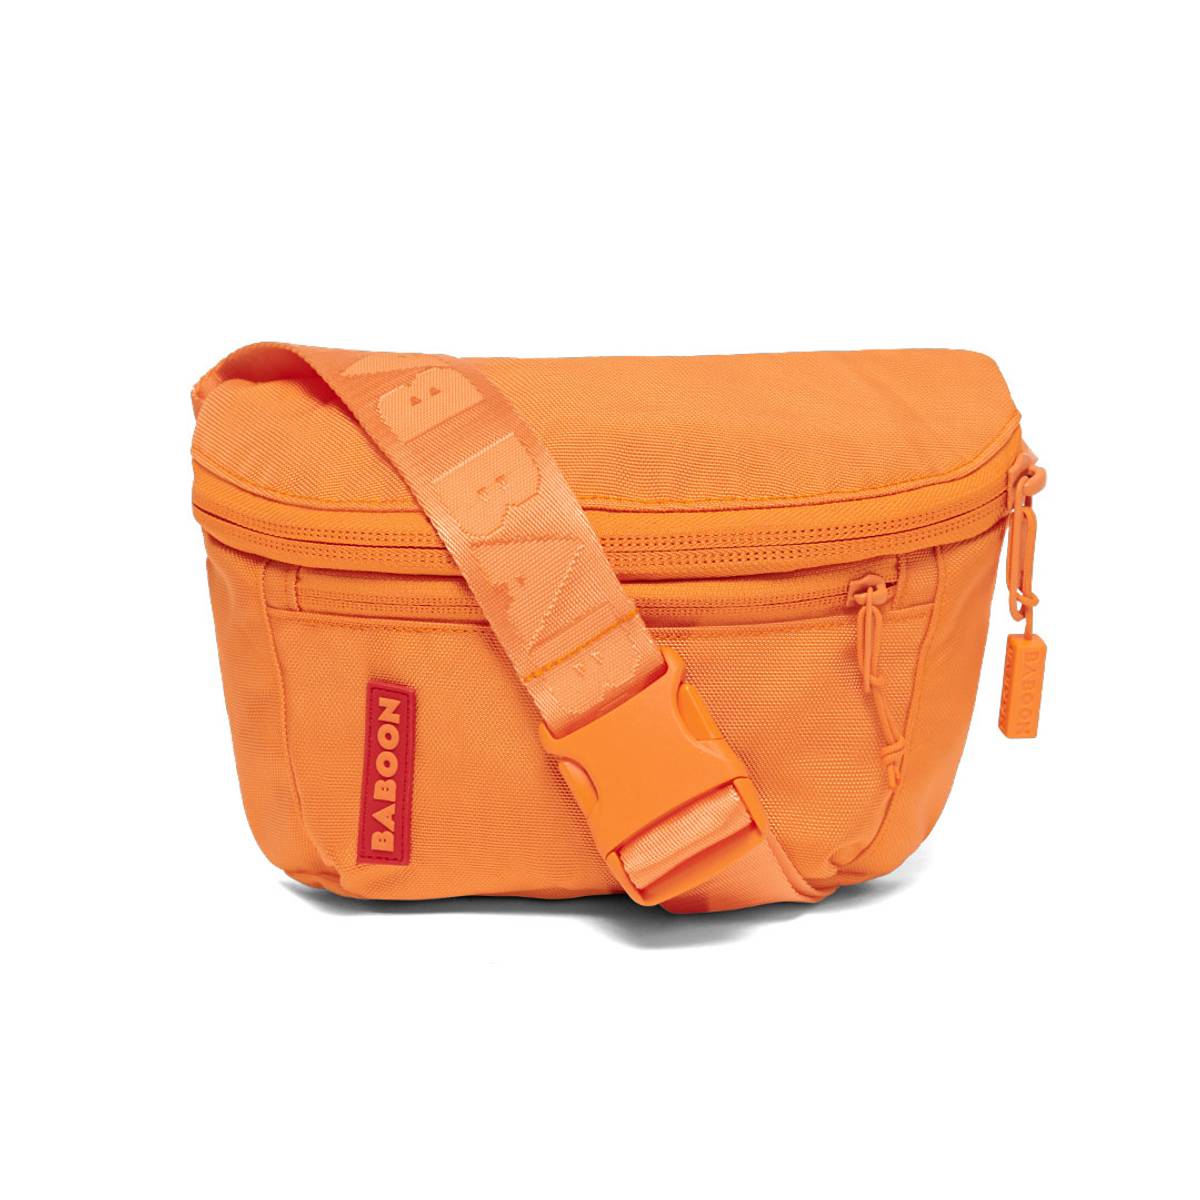 BABOON Fannypack (3L): For festivals, city adventures or travel ...